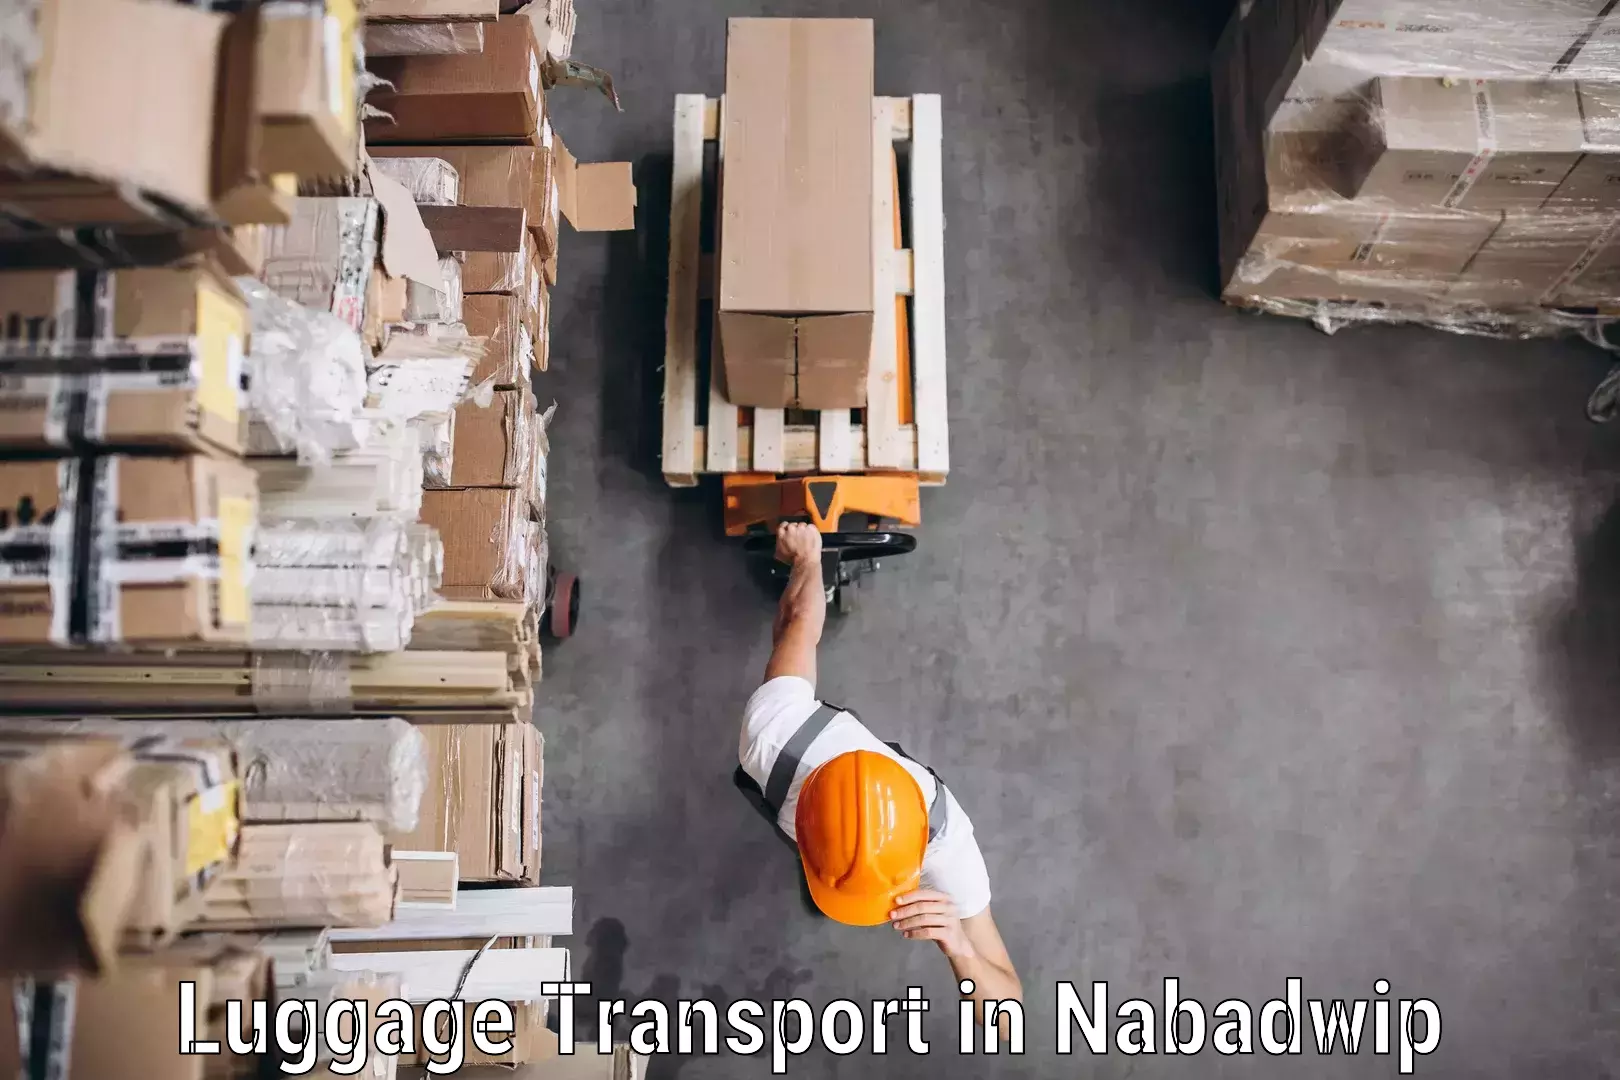 Luggage transport service in Nabadwip